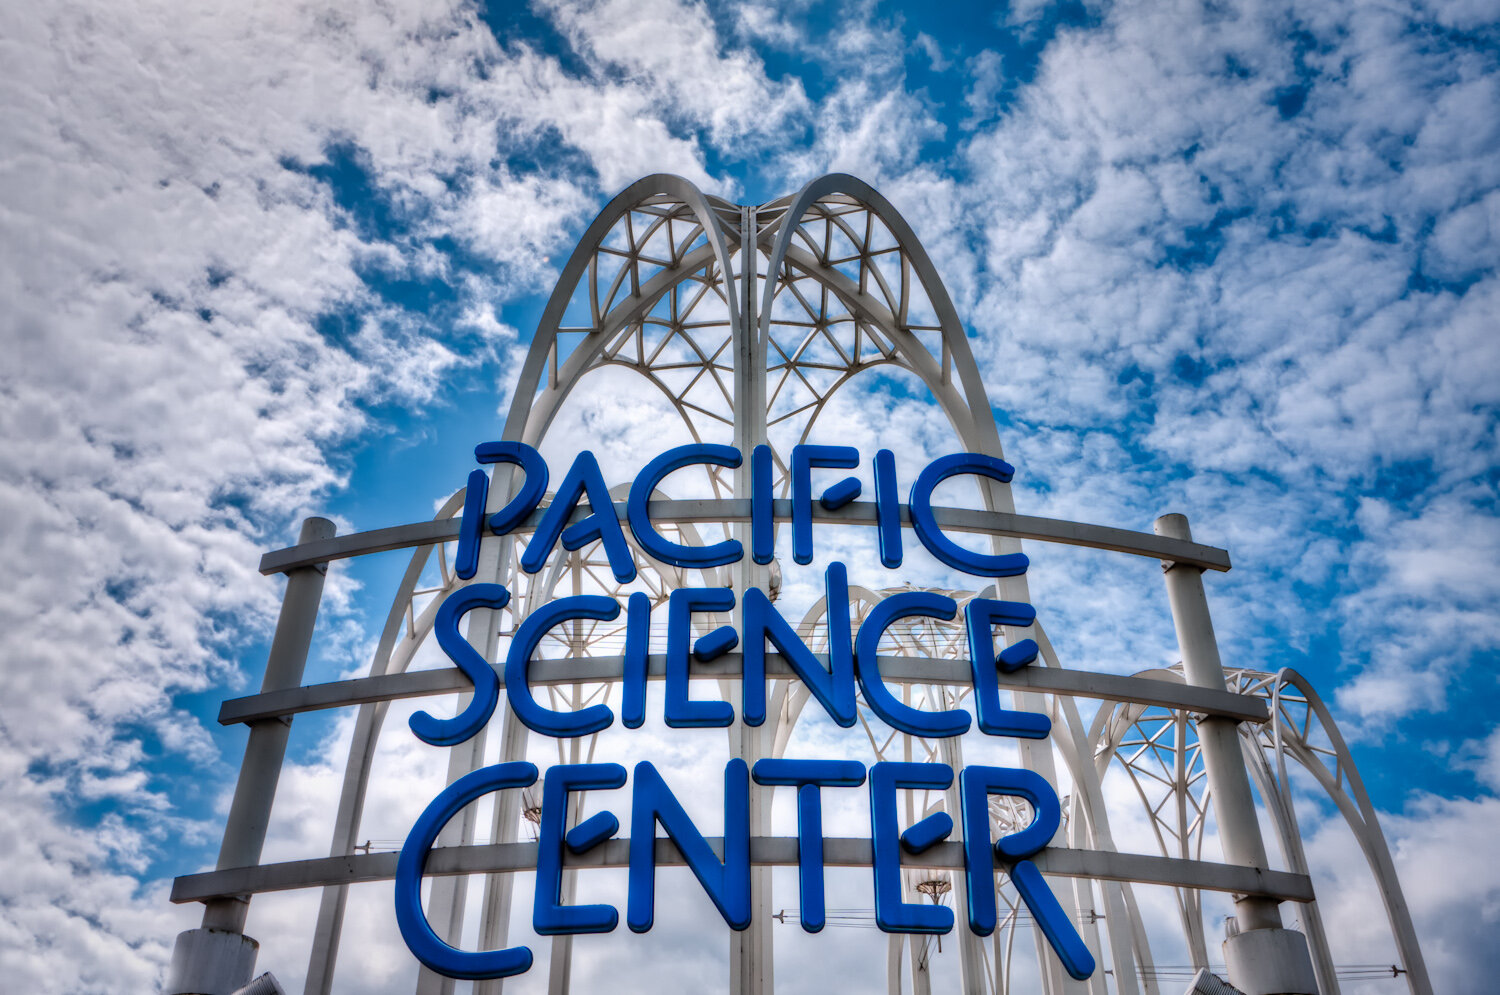 Pacific Science Center.jpg